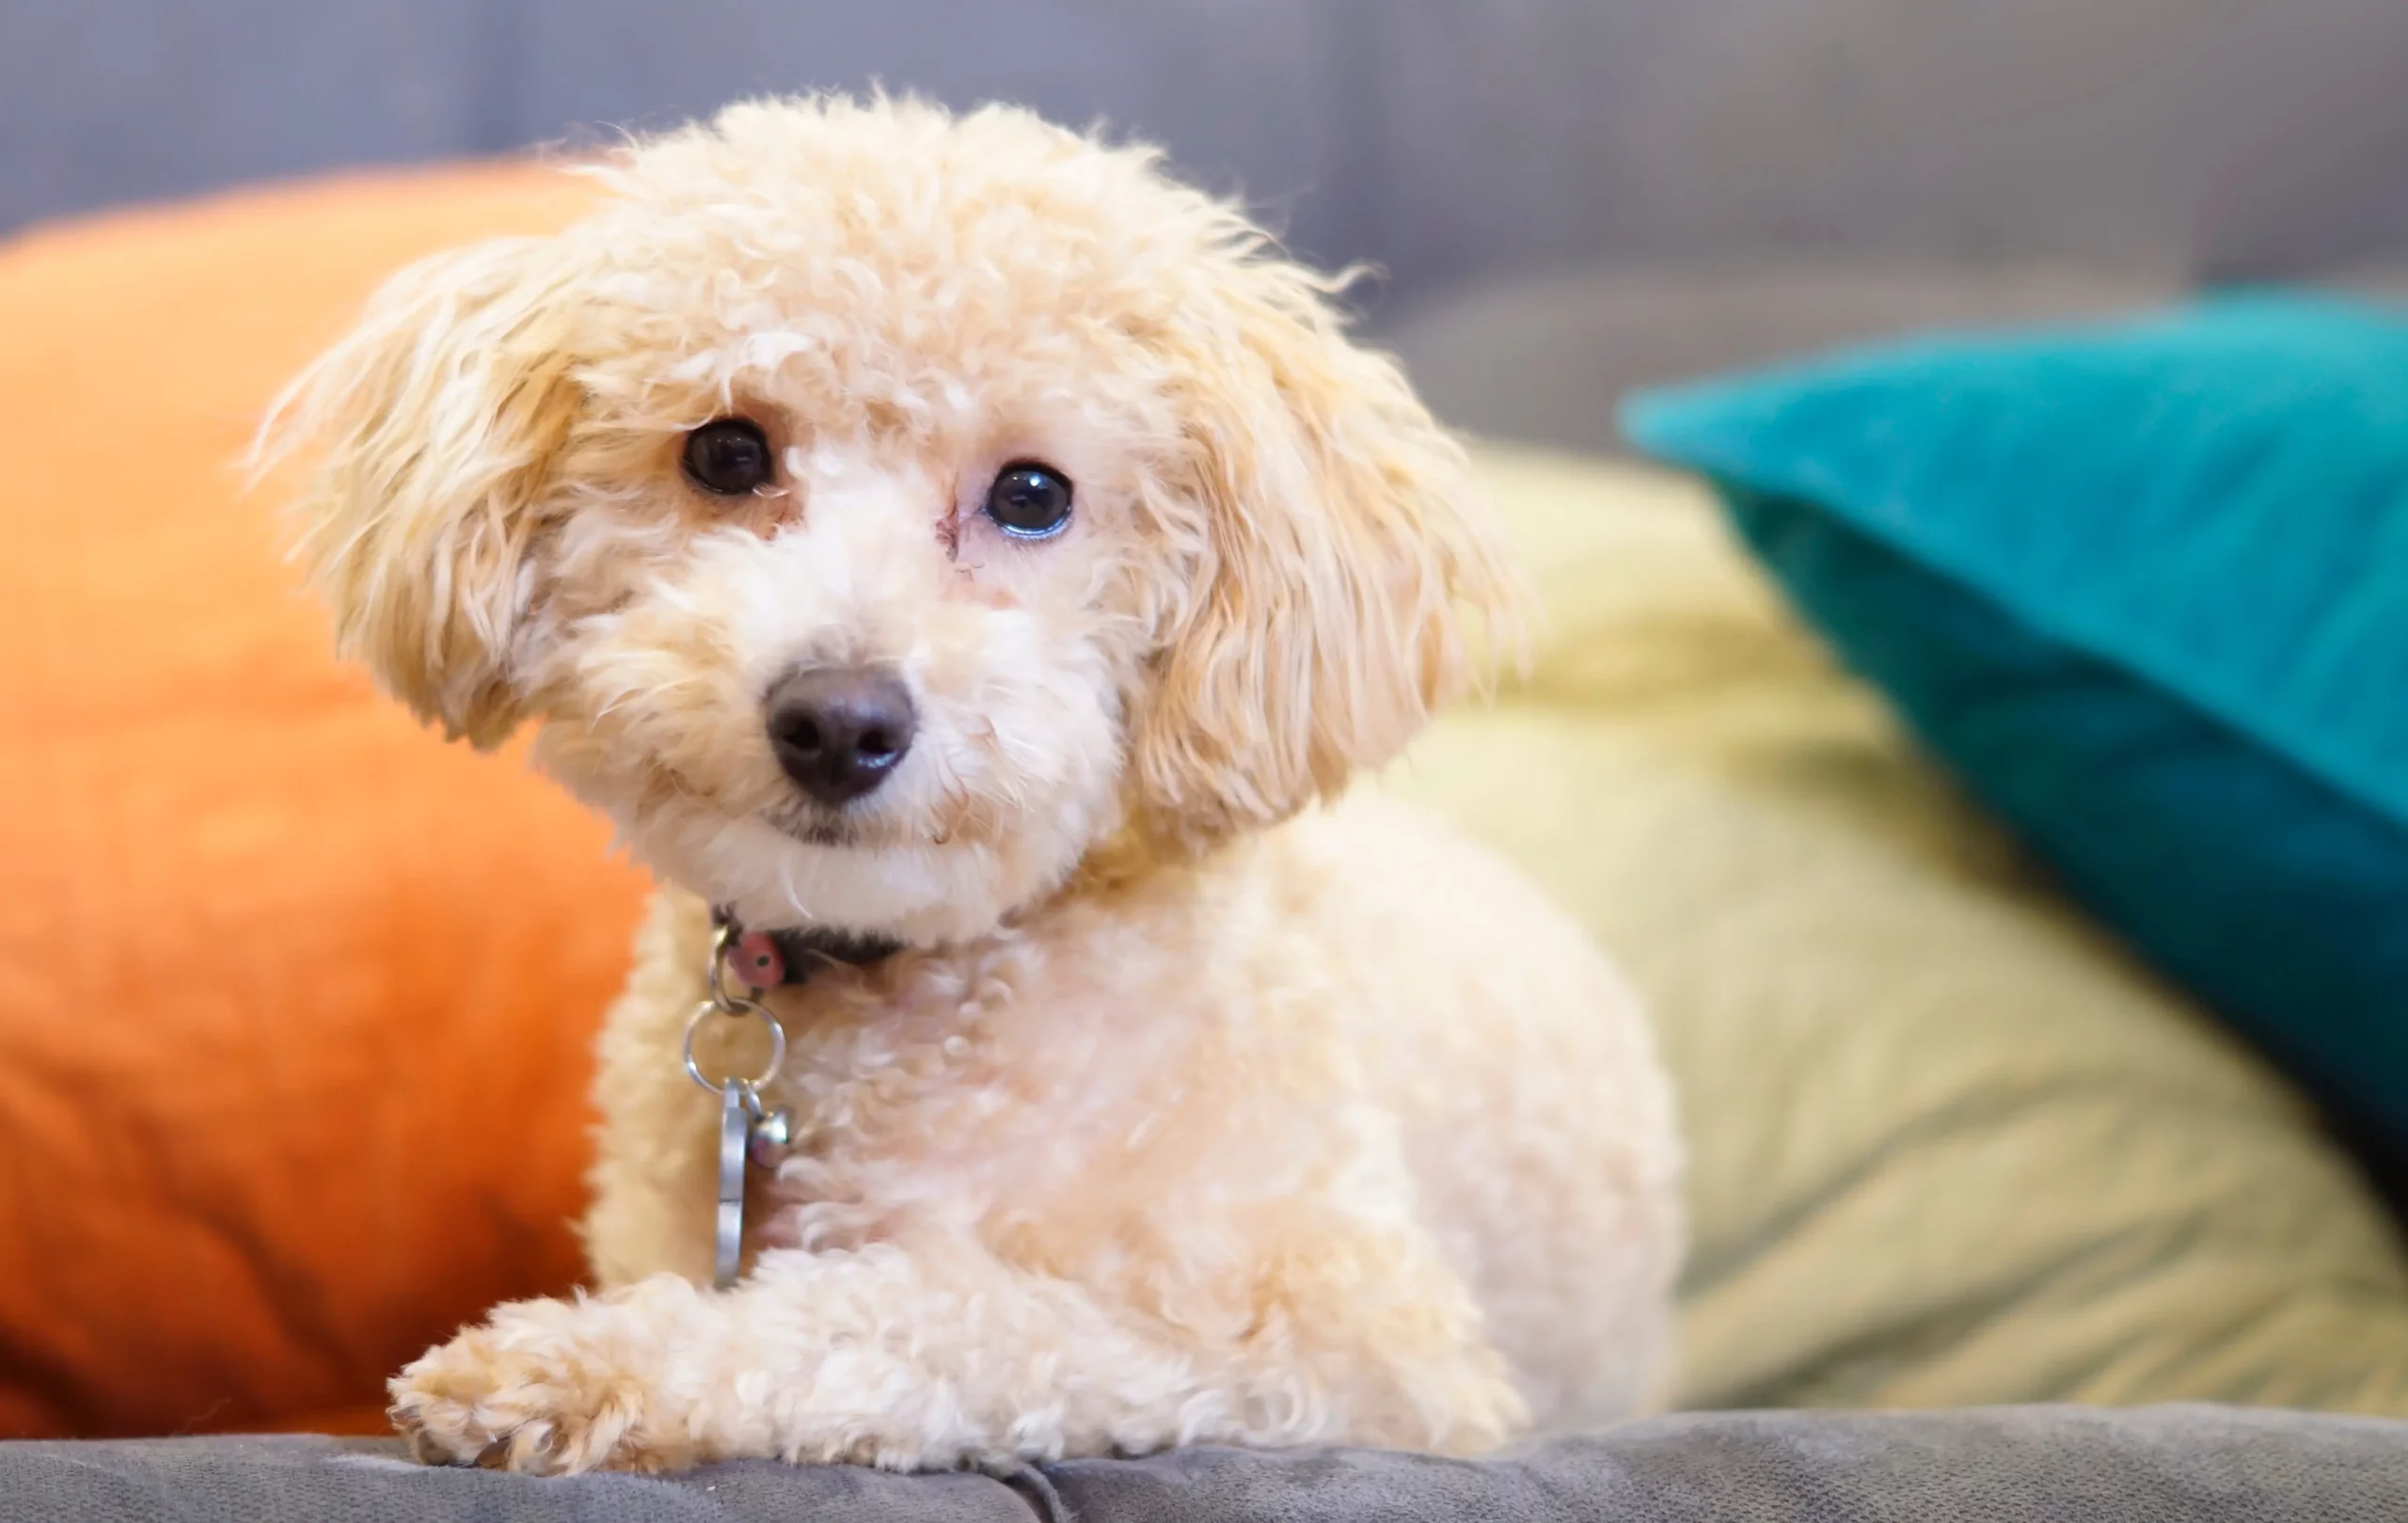 A small poodle sitting on a couch with colorful pillows, showcasing its well-groomed appearance.